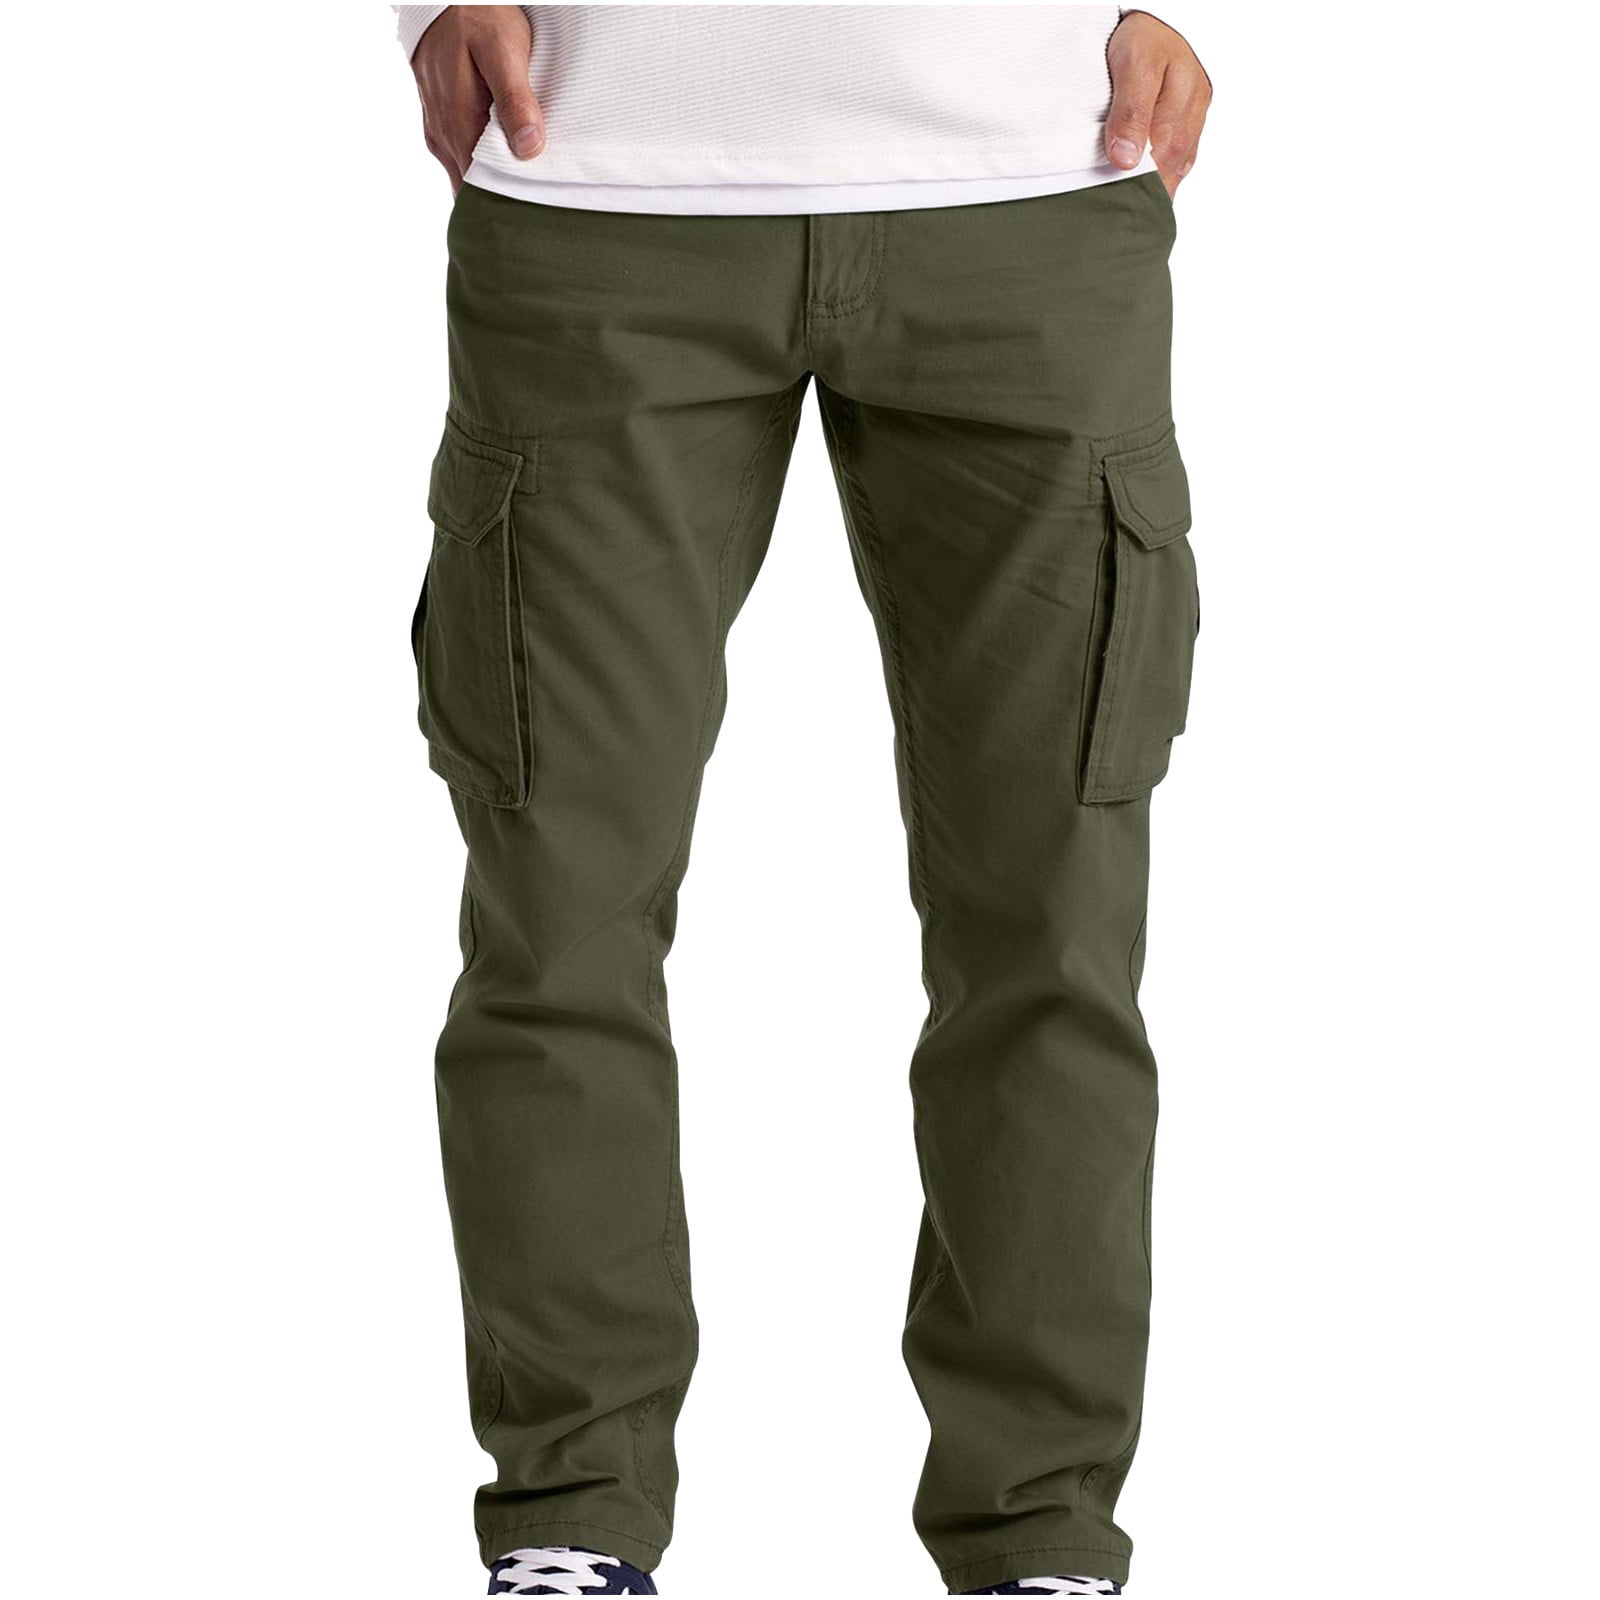 ZKCCNUK Cargo Pants for Men's Cargo Trousers Work Wear Combat Safety Cargo  6 Pocket Full Pants Army Green XL on Clearance